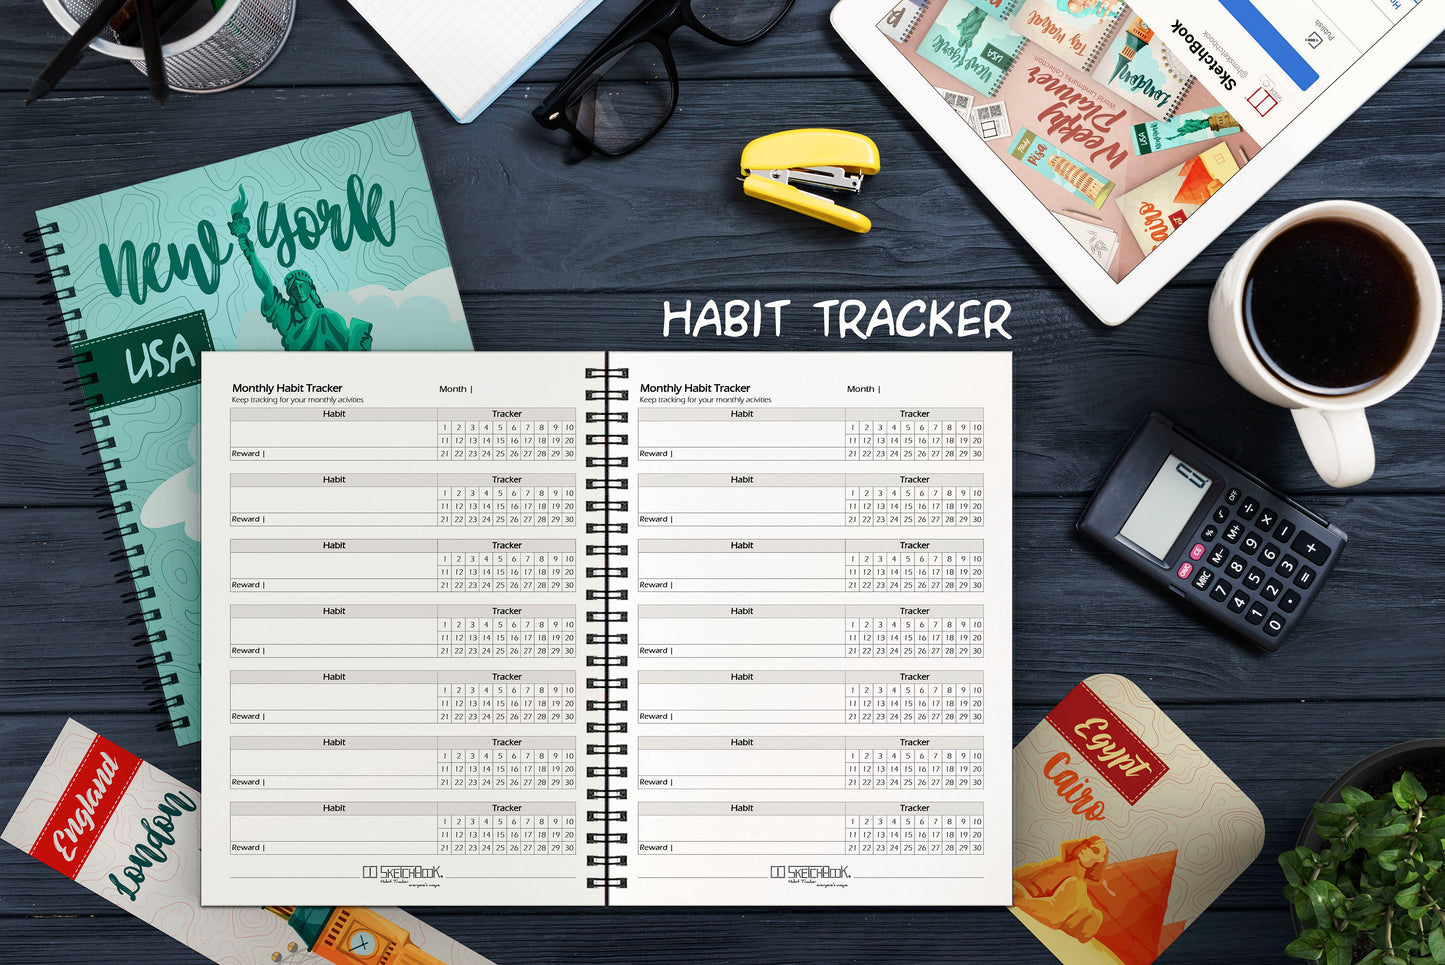 Weekly Planner Set | 20 X 14 cm - (Cities Edition) - Pisa - from SketchBook Stationery